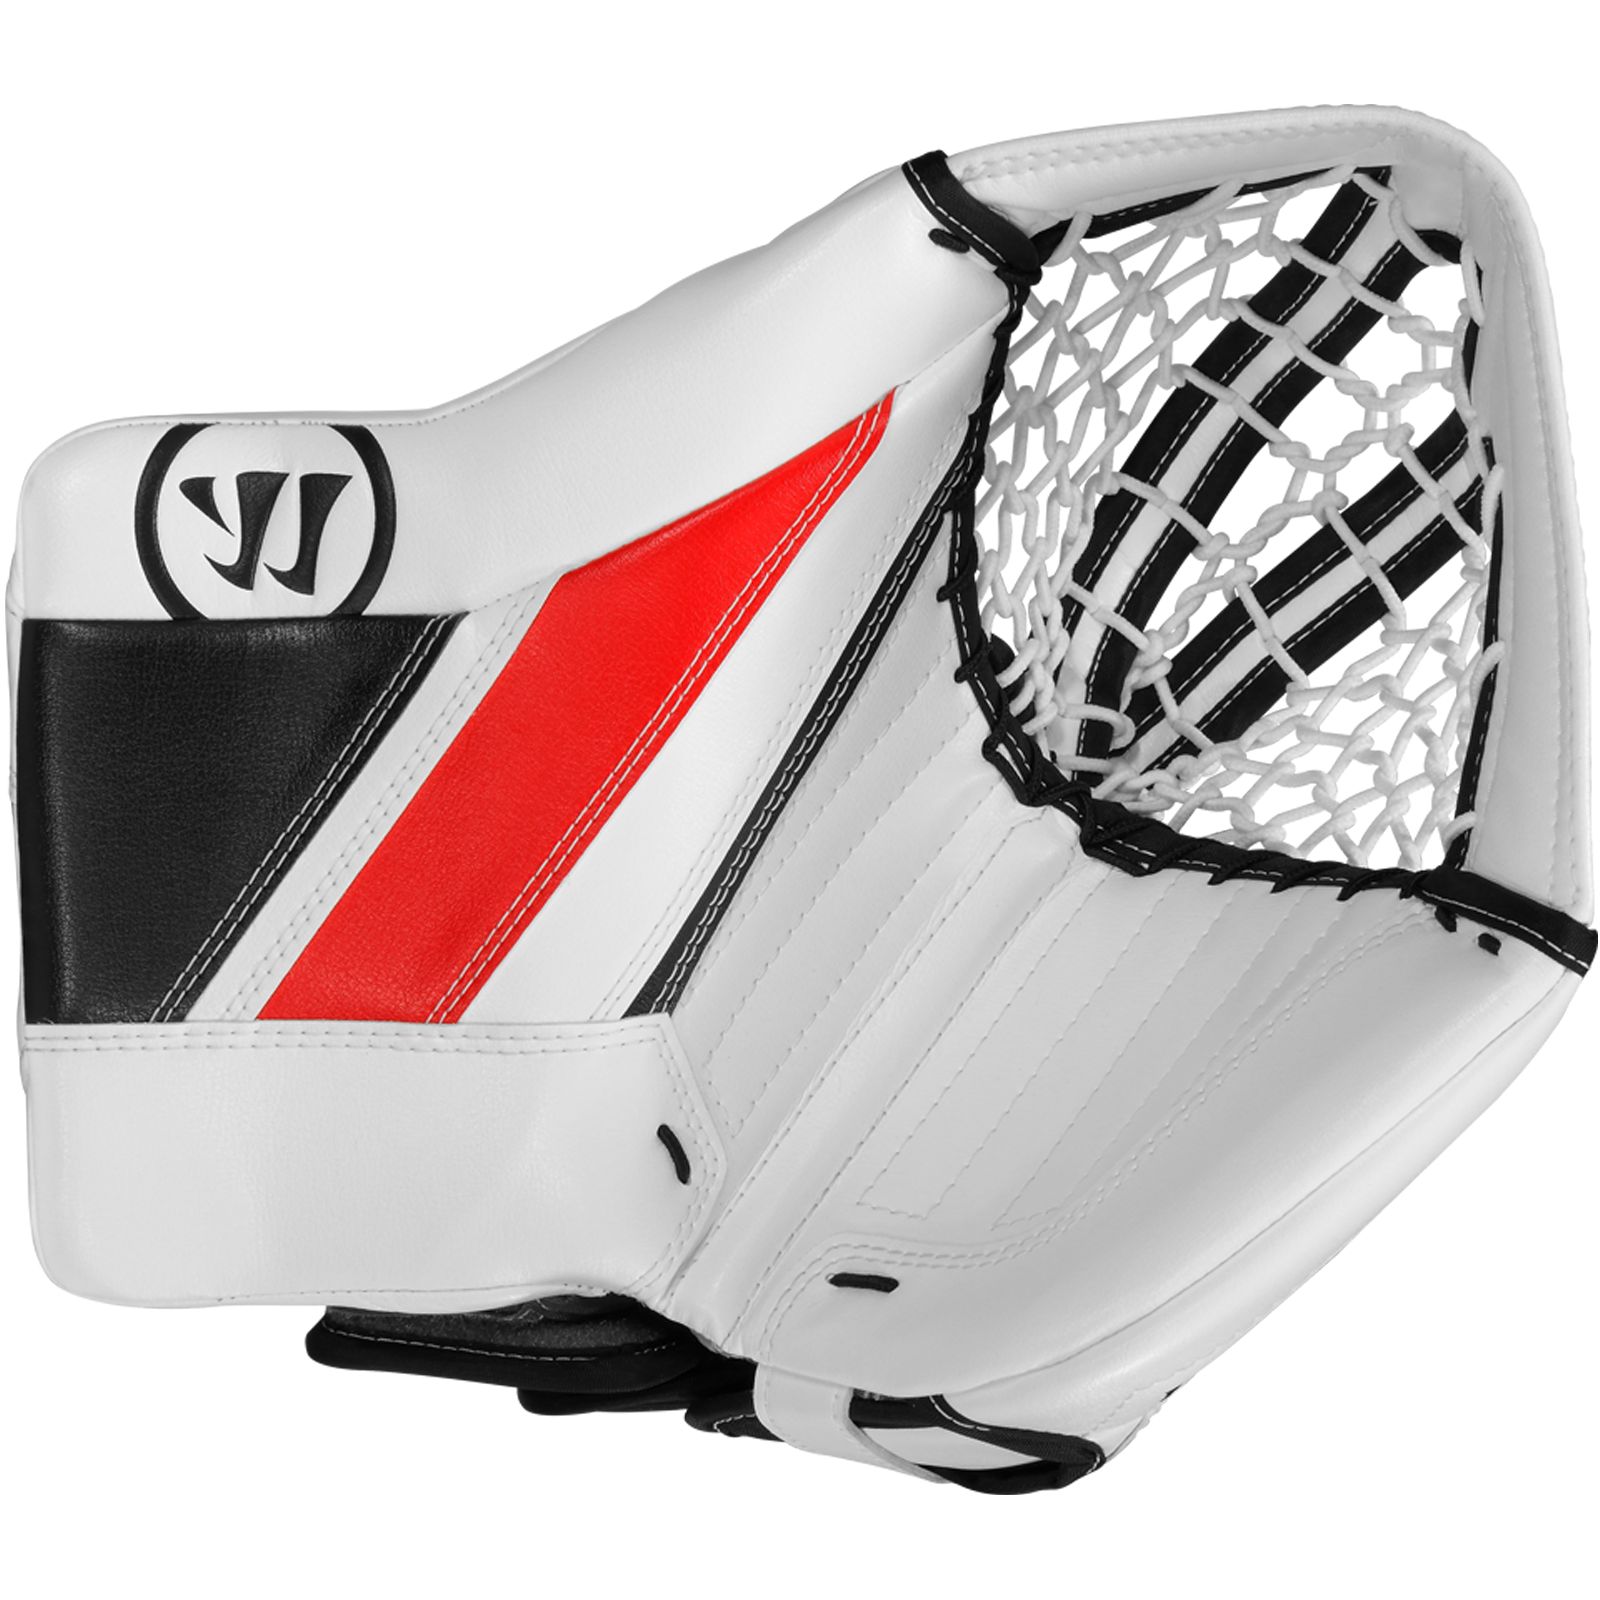 GT2 SR Trapper, White with Black & Red image number 0